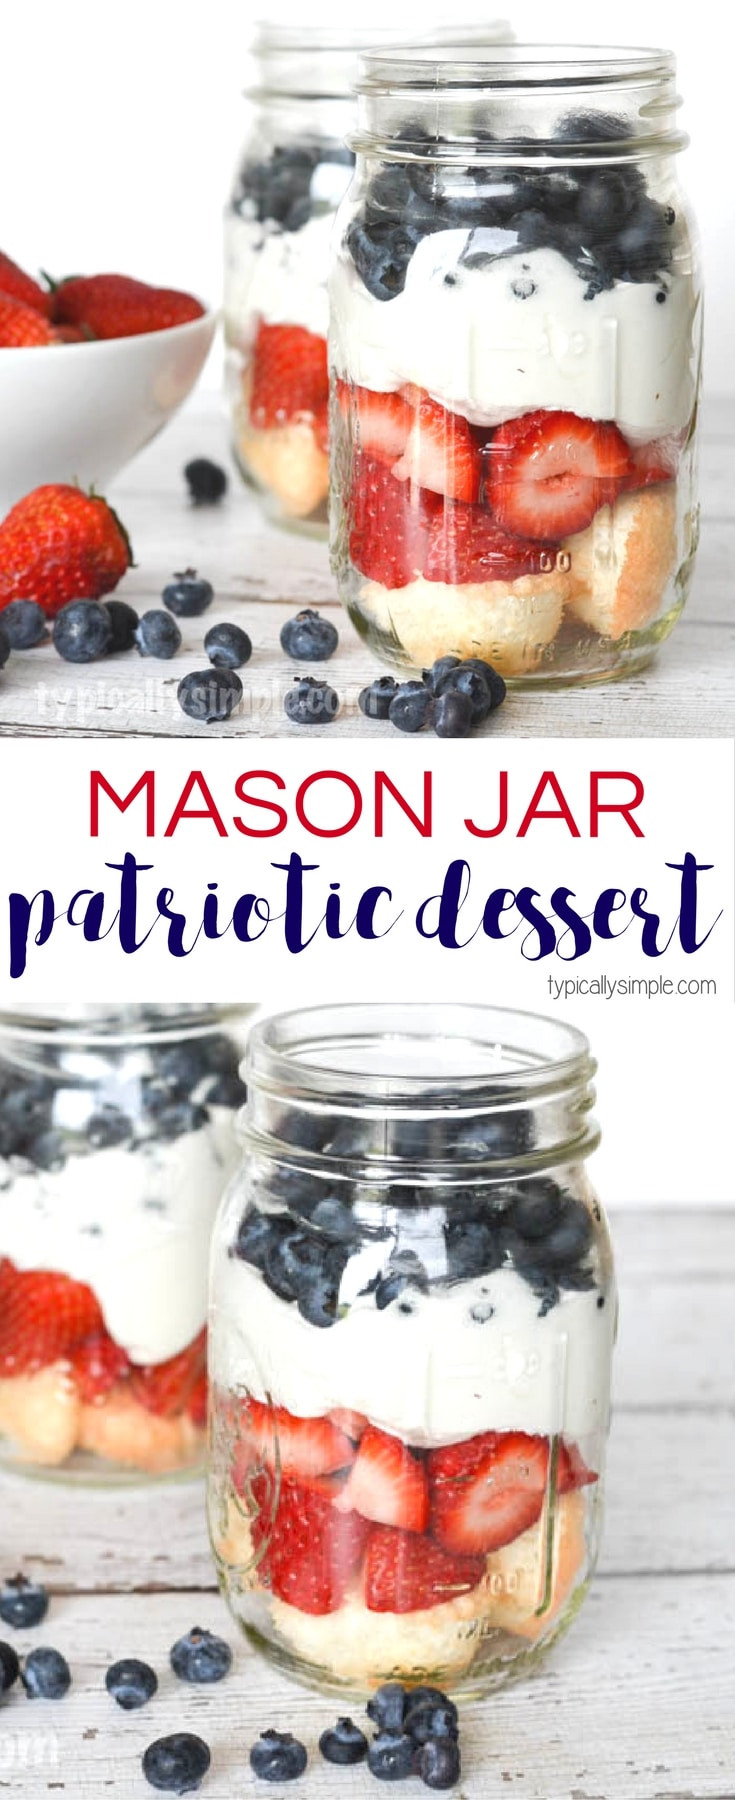 Quick 4Th Of July Desserts
 Patriotic Dessert in a Jar Typically Simple